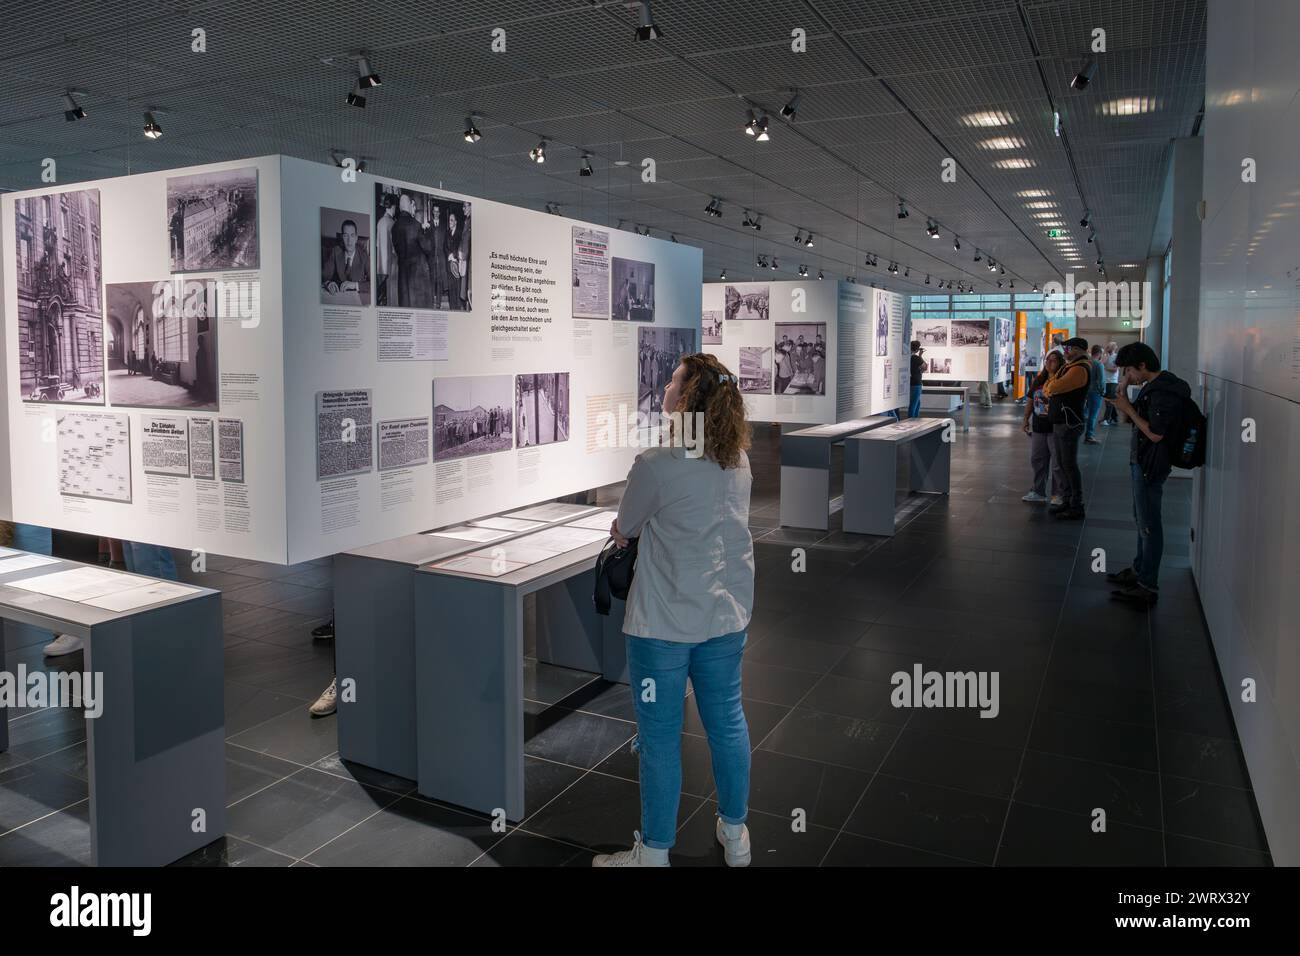 General view of visitors looking at the horrific images of the Nazi regime and the Holocaust in the Topography of Terror, Berlin, Germany. Stock Photo